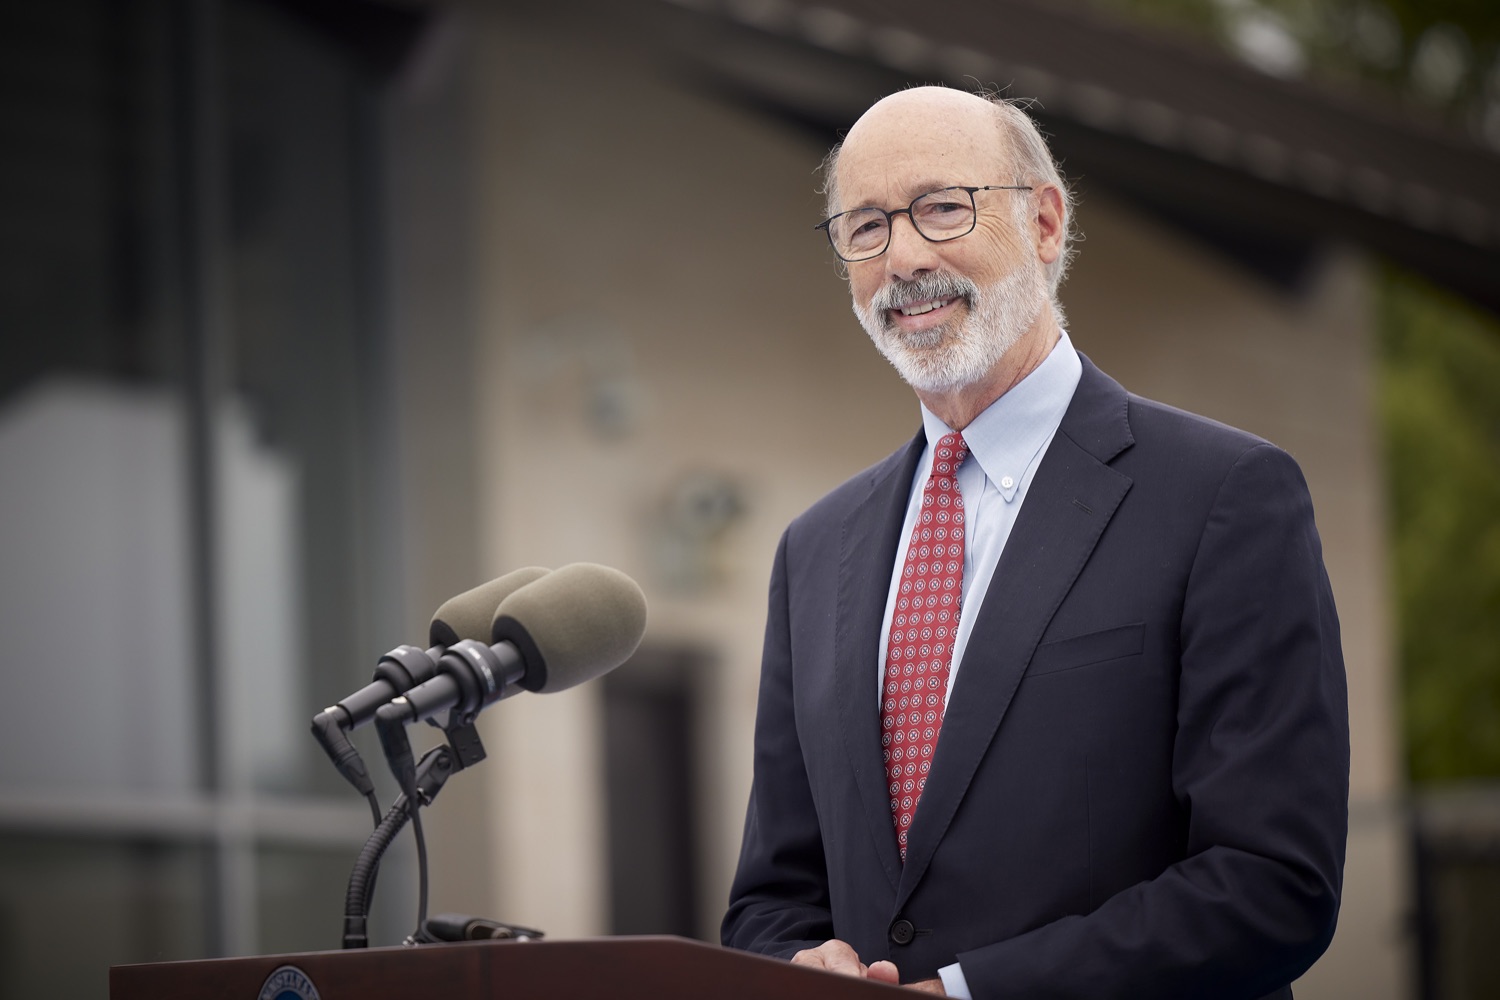 Pennsylvania Governor Tom Wolf speaks with the press.   Governor Tom Wolf today visited the Early Learning Center at Crispus Attucks in York to highlight his new state child tax credit program, modeled after the federal program, to support Pennsylvanias working families and ensure unbarred access to high-quality early childhood education.  York, PA   July 26, 2022<br><a href="https://filesource.amperwave.net/commonwealthofpa/photo/22049_gov_childTaxCredit_dz_002.JPG" target="_blank">⇣ Download Photo</a>